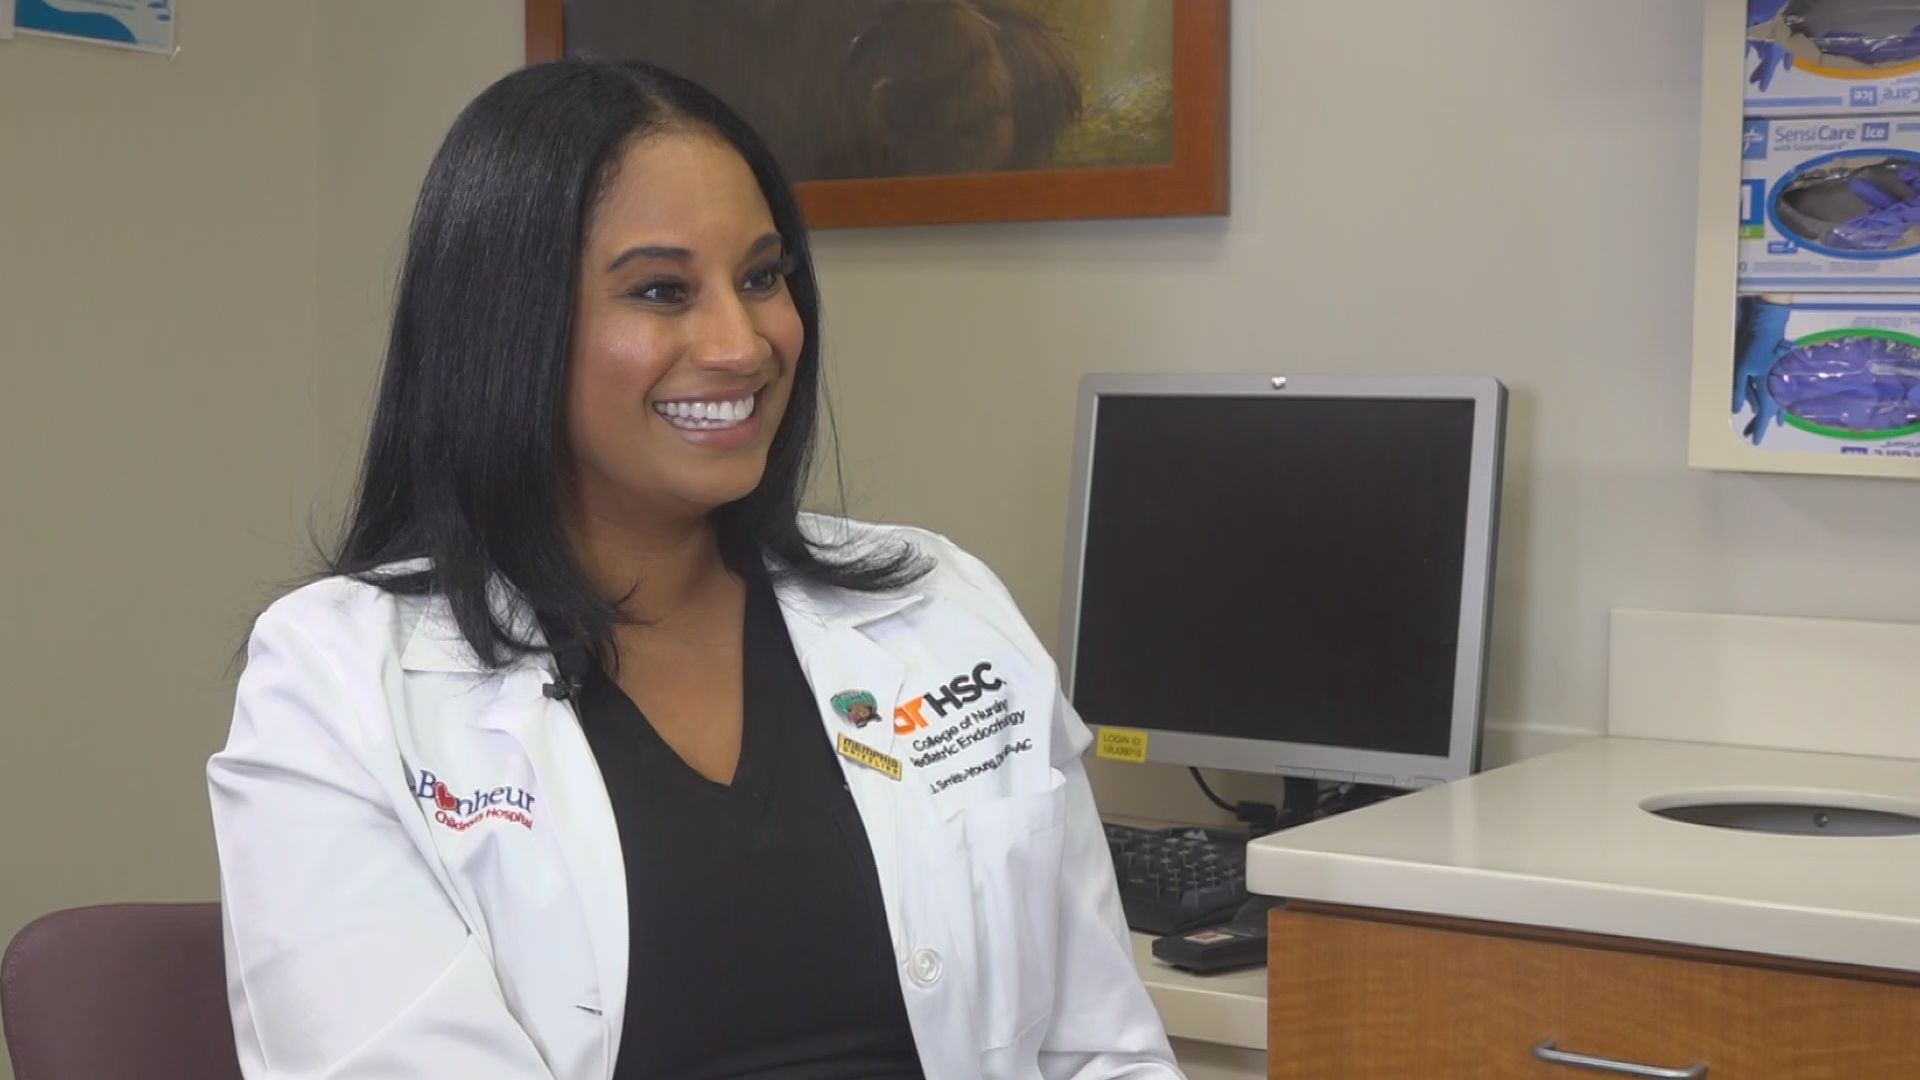 Celebrating Women's History Month, we're seeing Dr. Jamila Smith-Young's moment in real time as a mother, a wife, a healthcare professional and Memphis' First Lady.